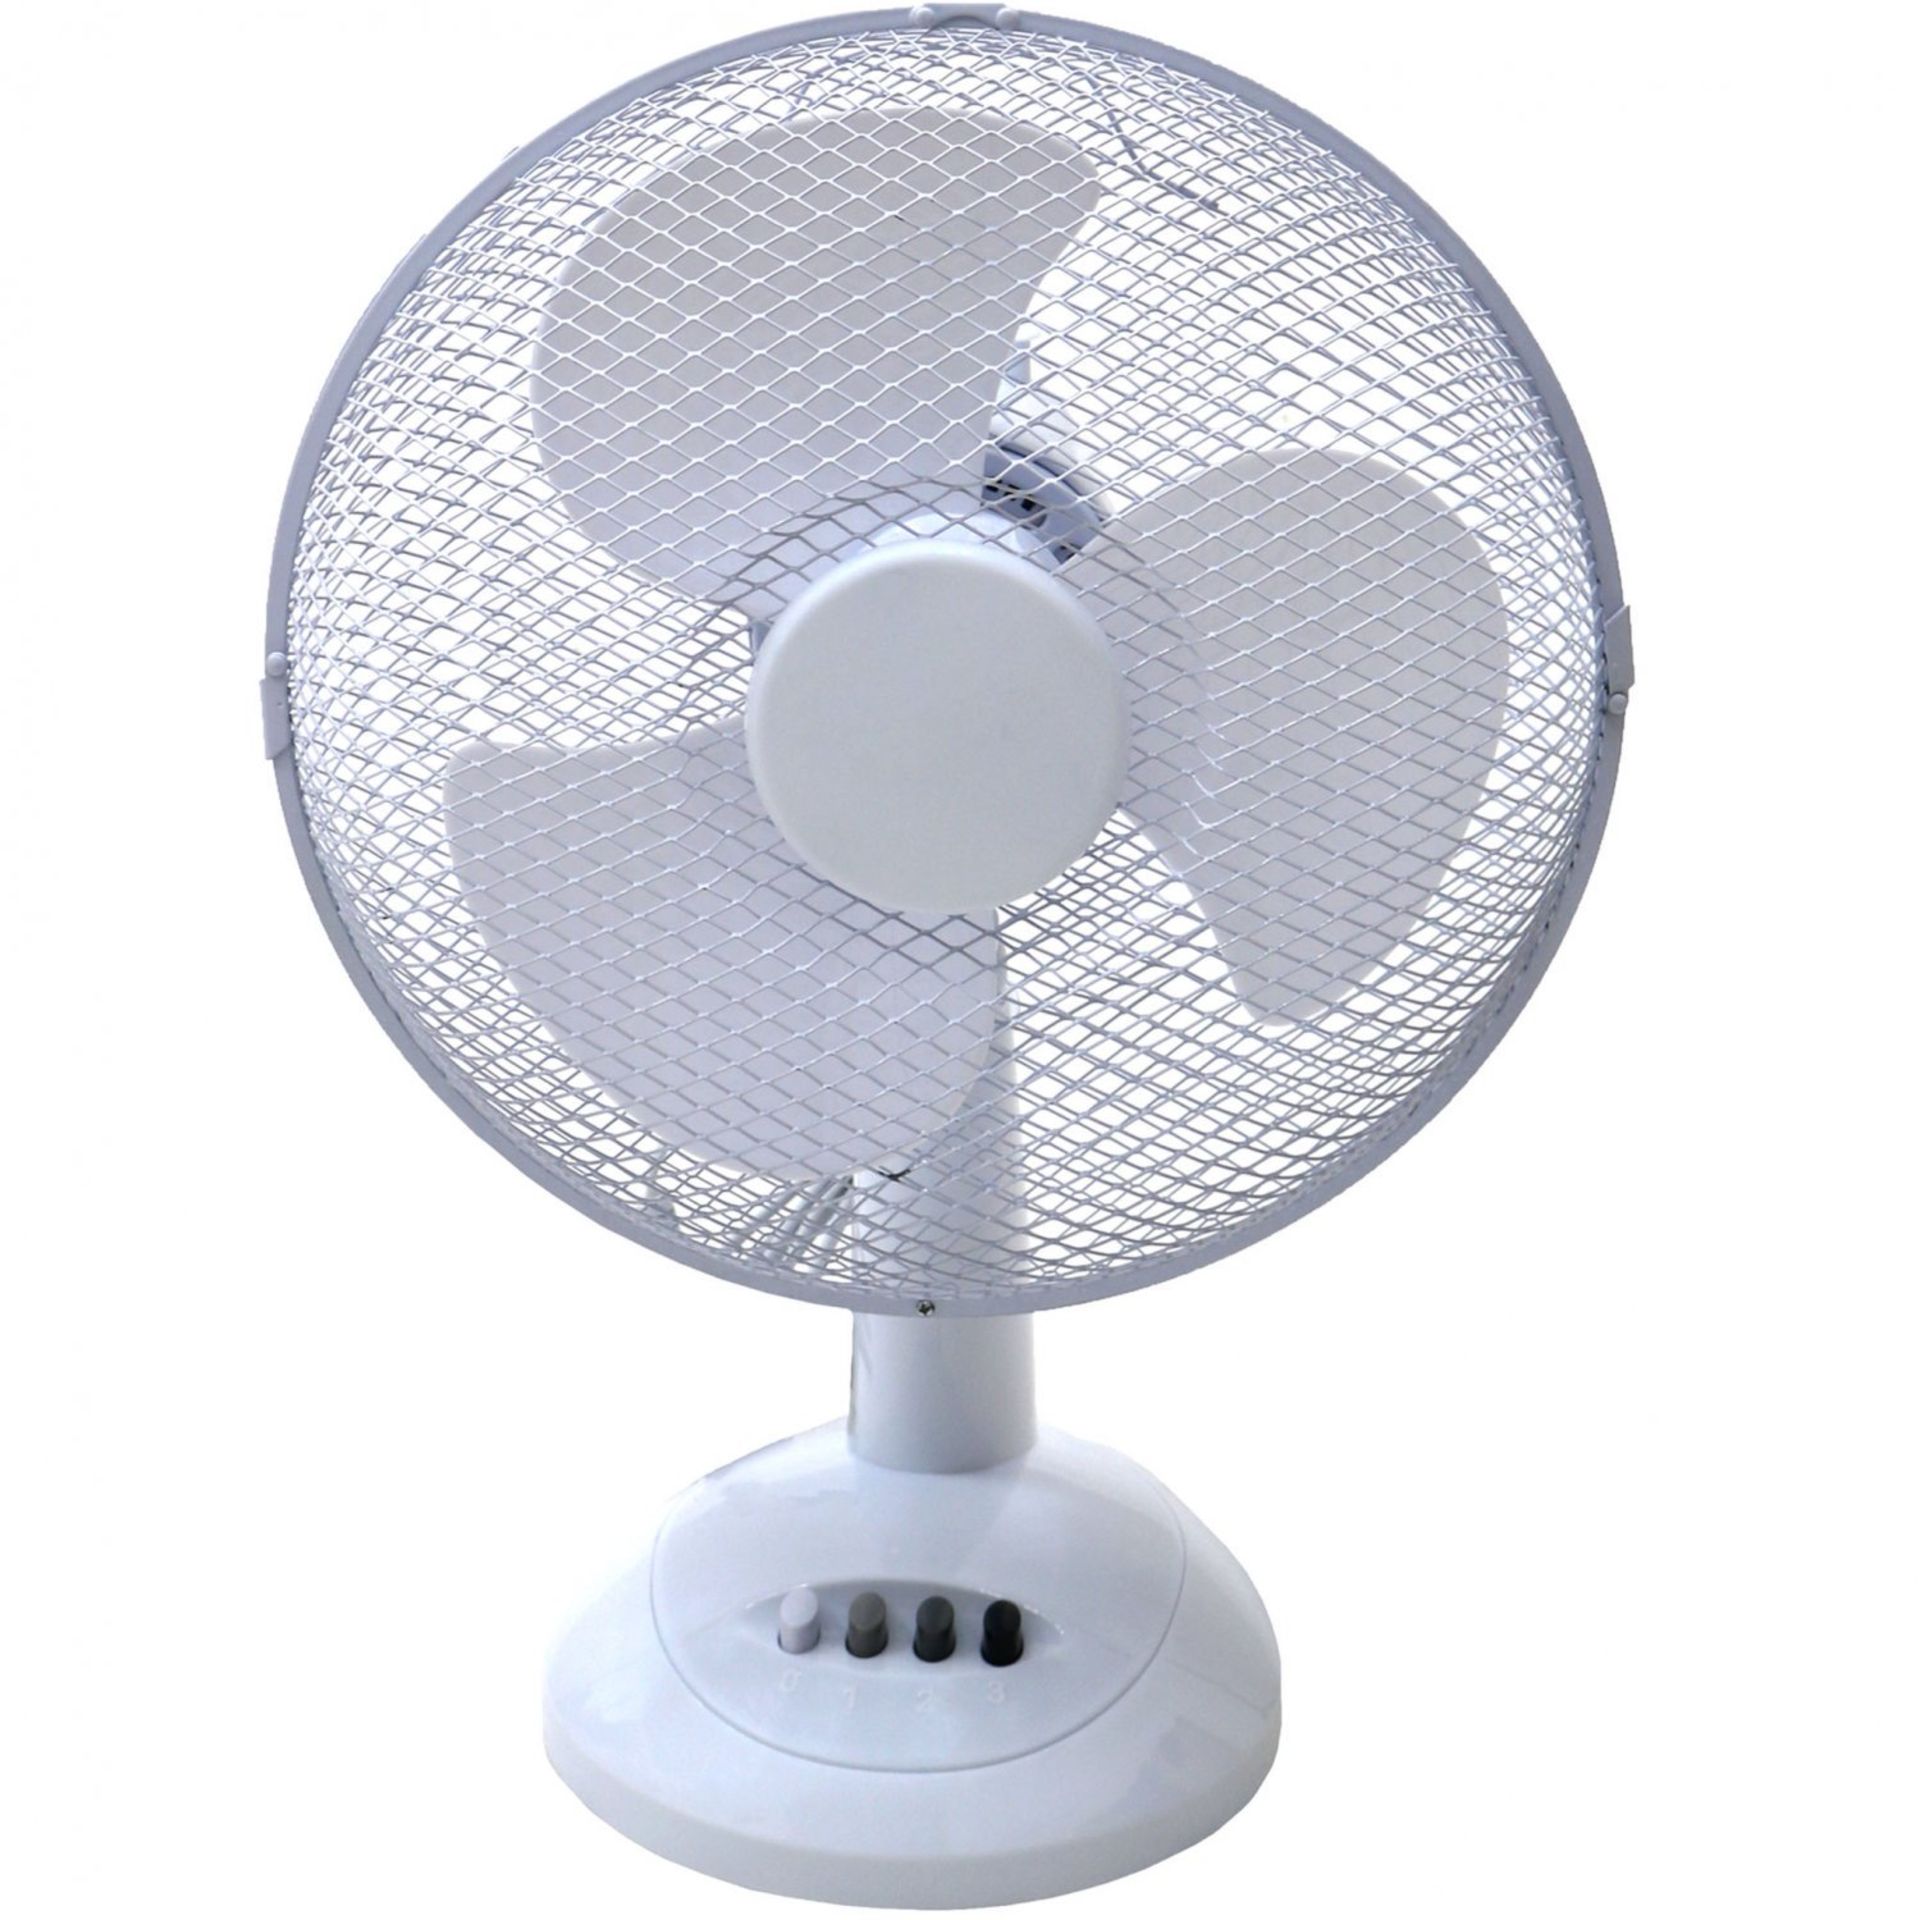 (LF262) 12" Oscillating White Desk Top Fan 3 Speed Push Button Speed Control Cable Length App...